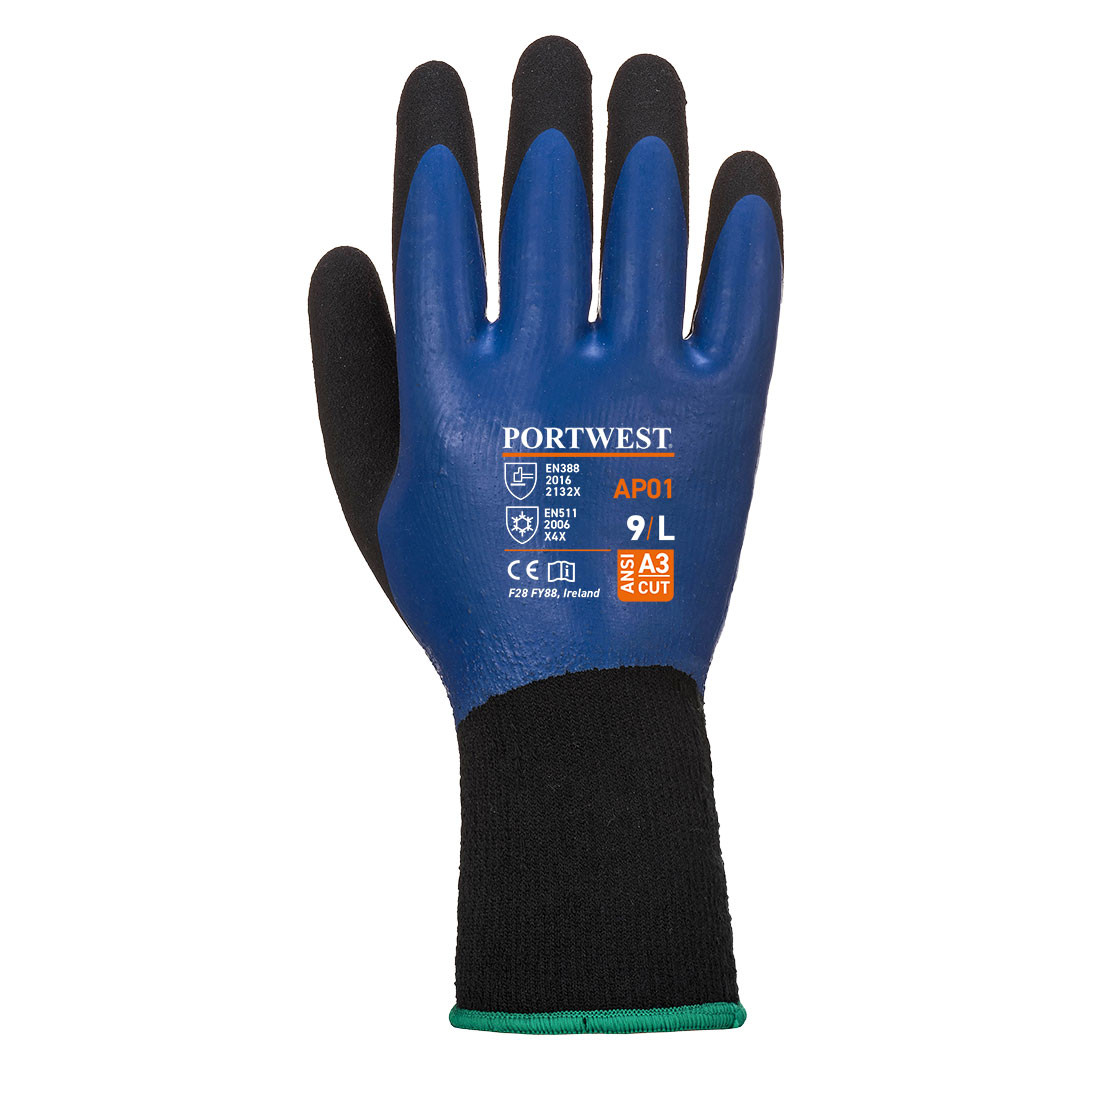 Thermo Pro Glove - Personal protection